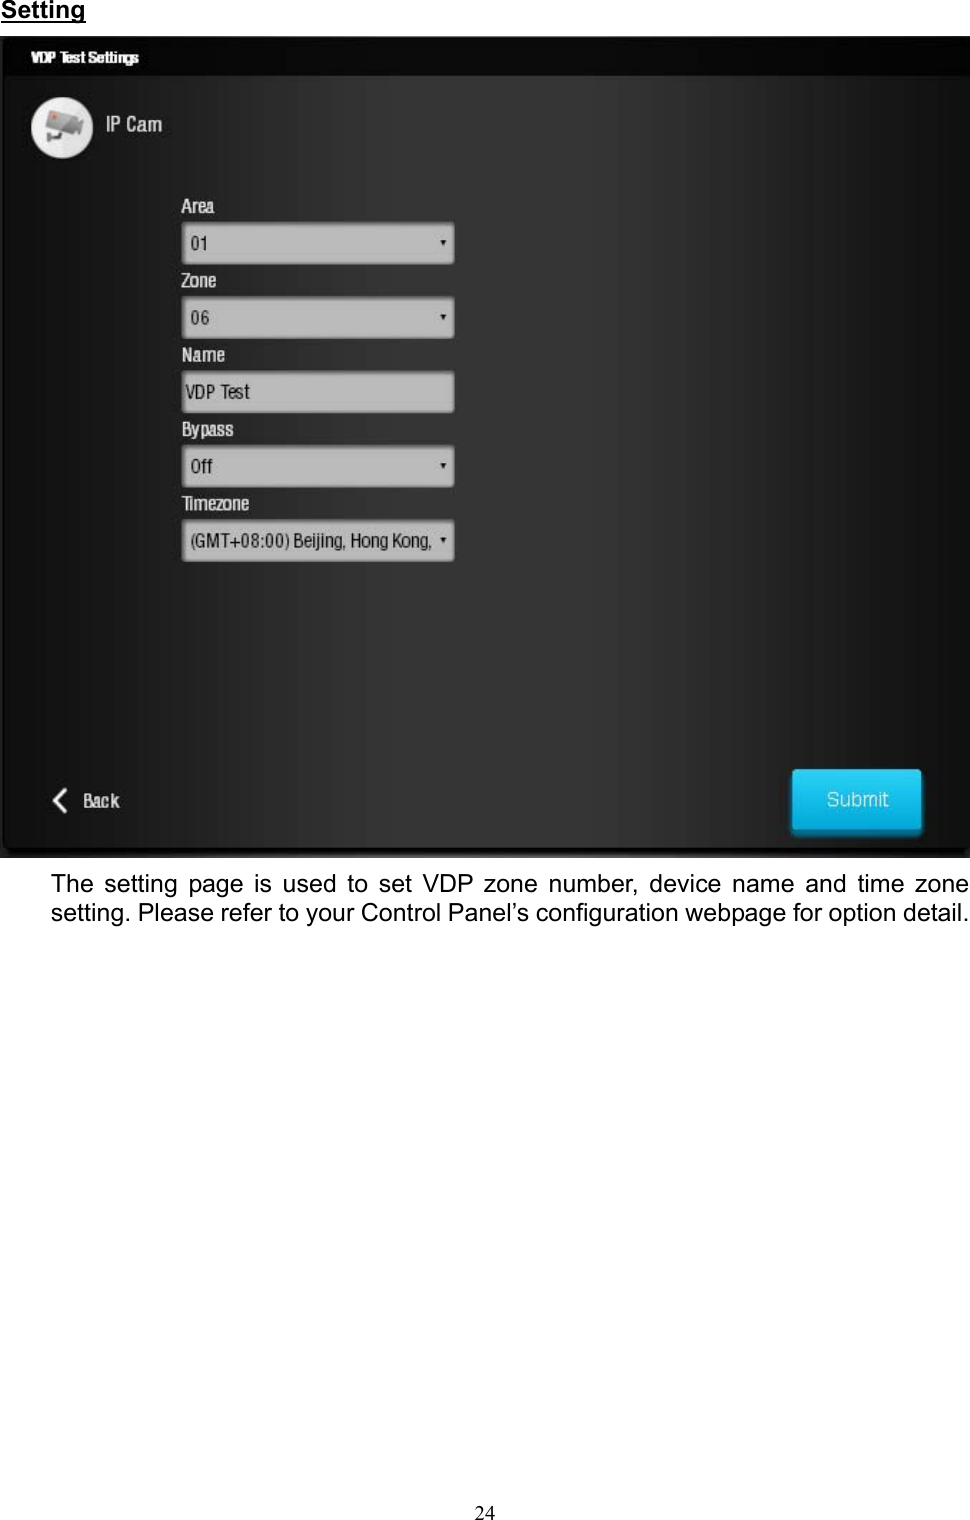 24  Setting  The  setting  page  is  used  to  set  VDP  zone  number,  device  name  and  time  zone setting. Please refer to your Control Panel’s configuration webpage for option detail.              